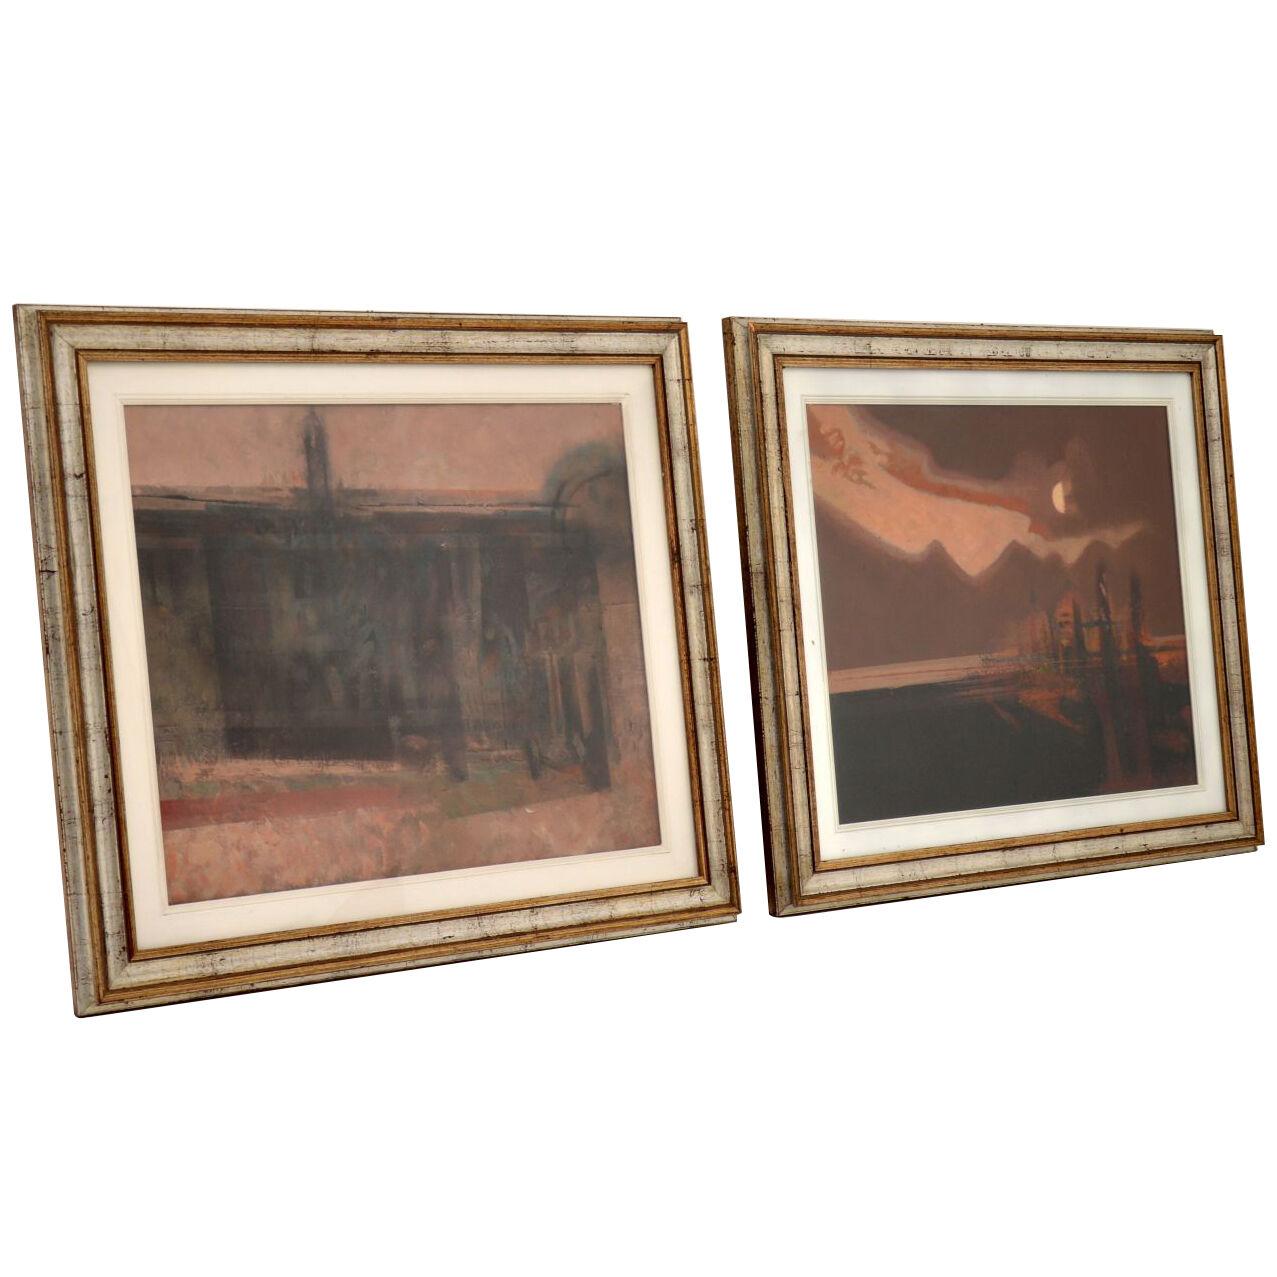 Pair of Italian Abstract Framed Oil Paintings c.1980 Signed "Giussani"